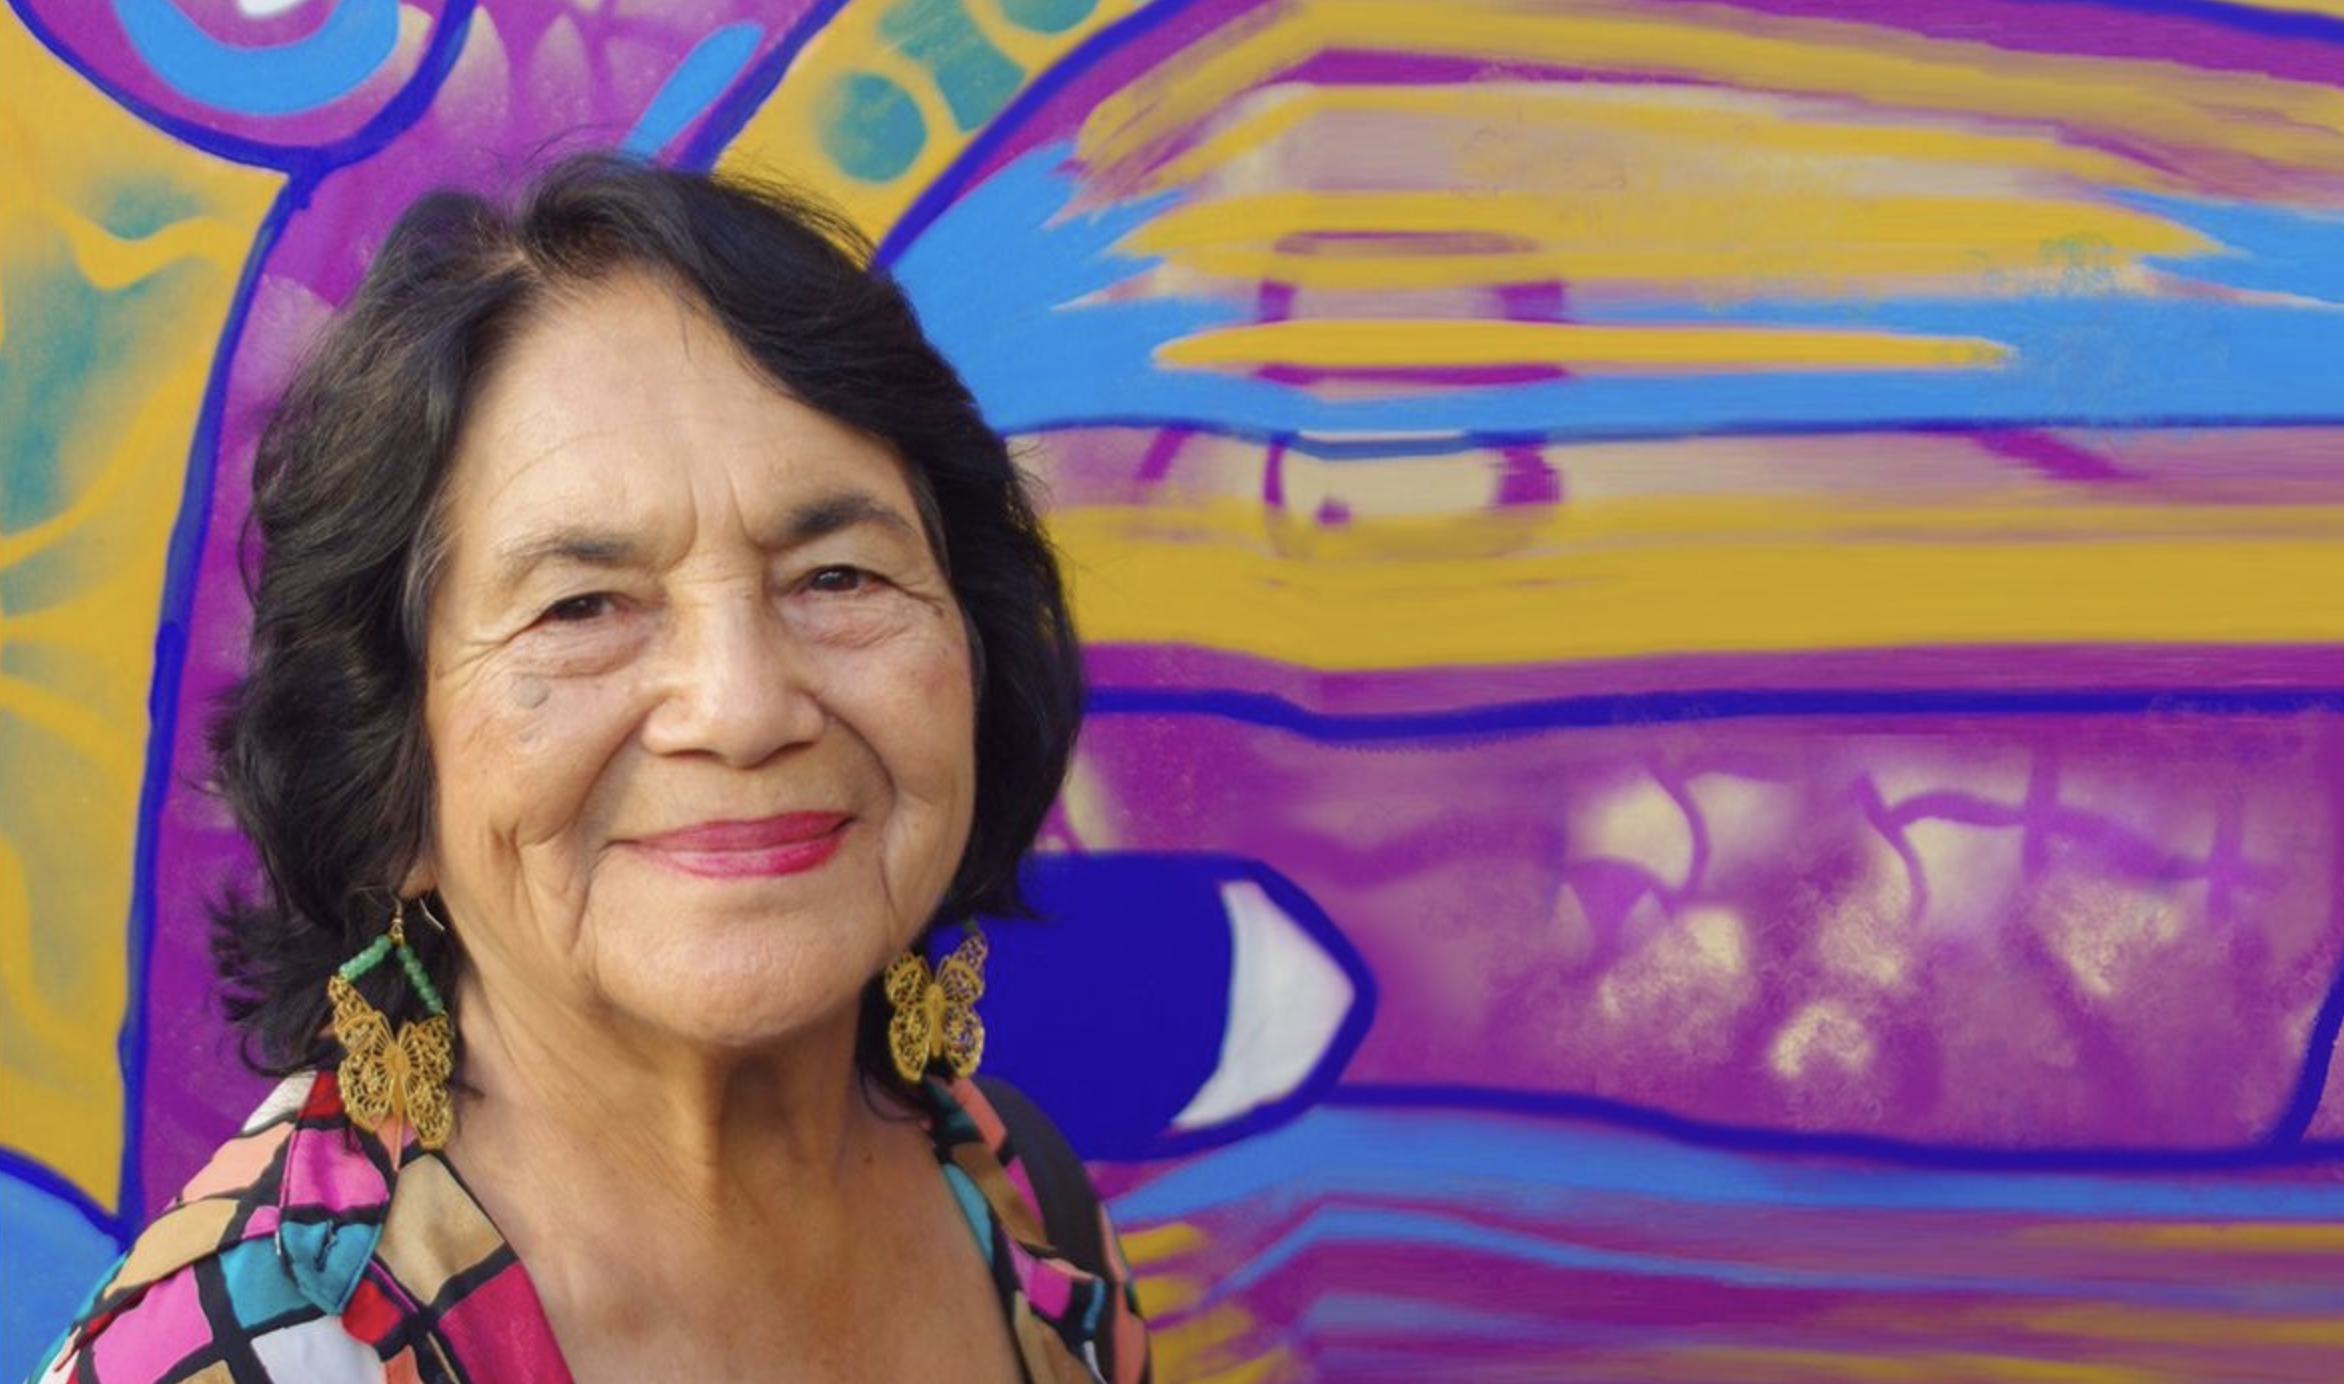 Dolores Huerta smiling in front of a vibrant mural